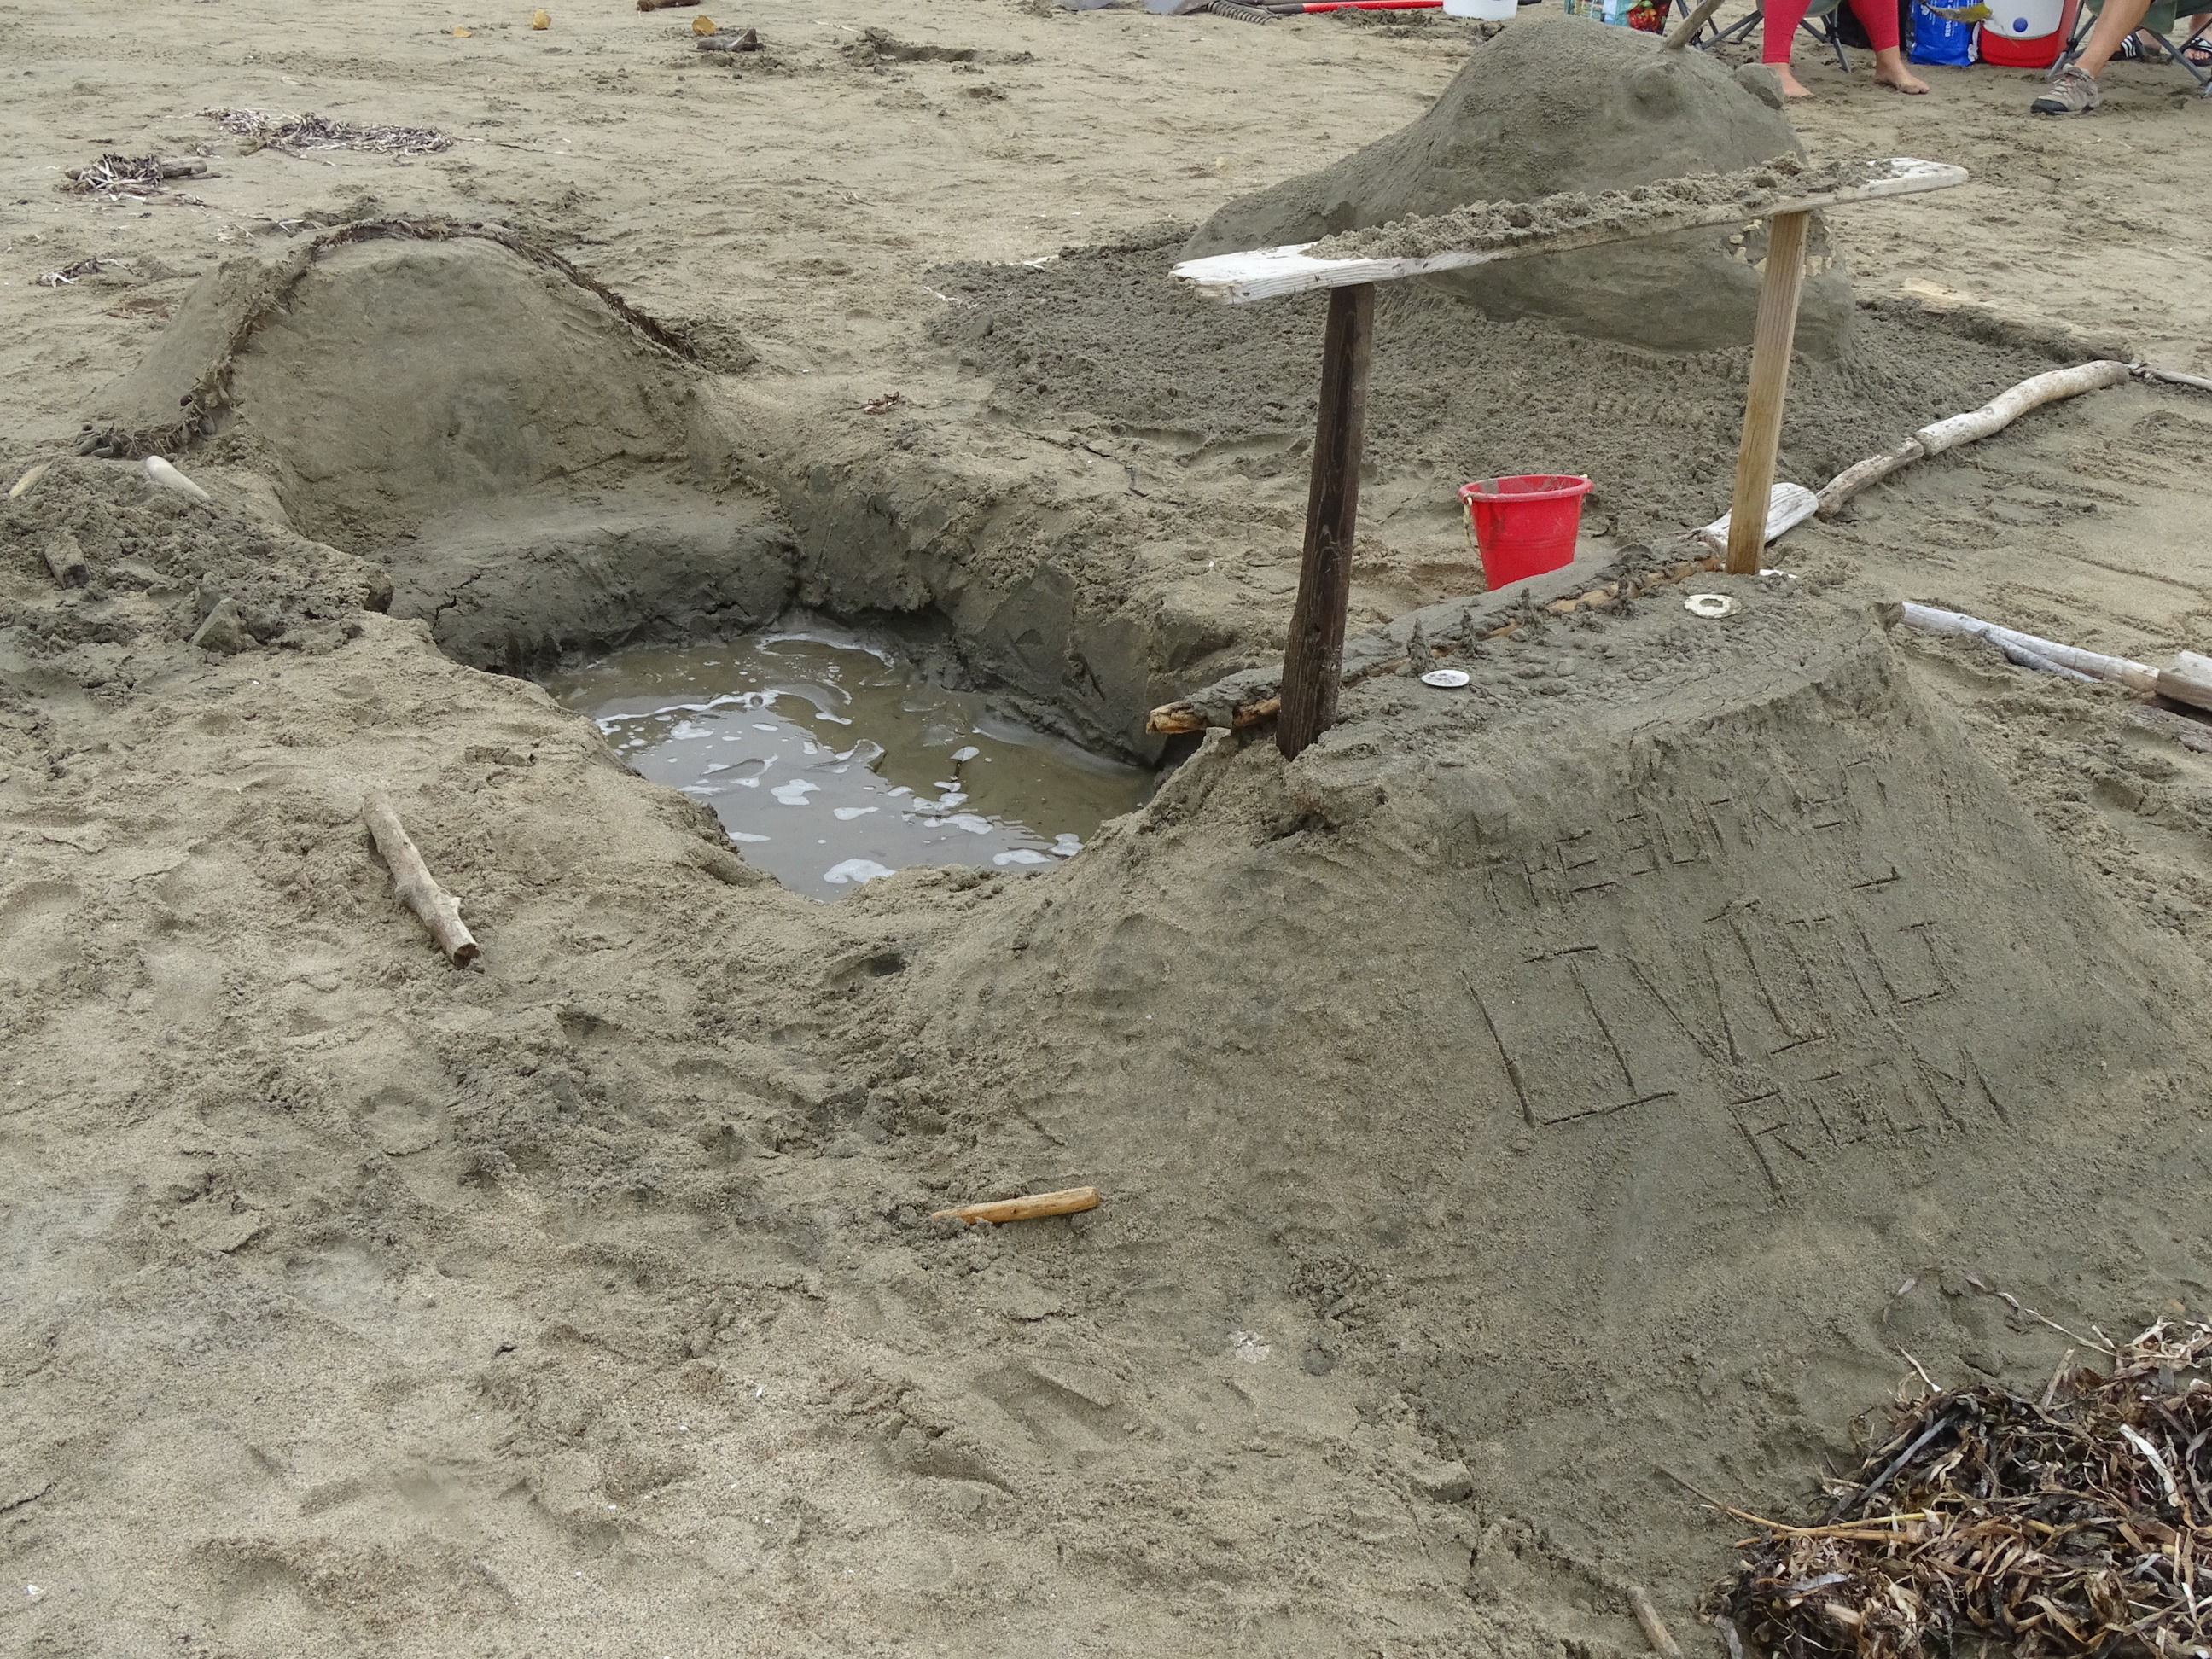 A sand sculpture of a water-filled hole with two mounds of sand on both sides. The mound on the right is topped by an arch made of driftwood and the words "The Sunken Living Room" written in the mound.